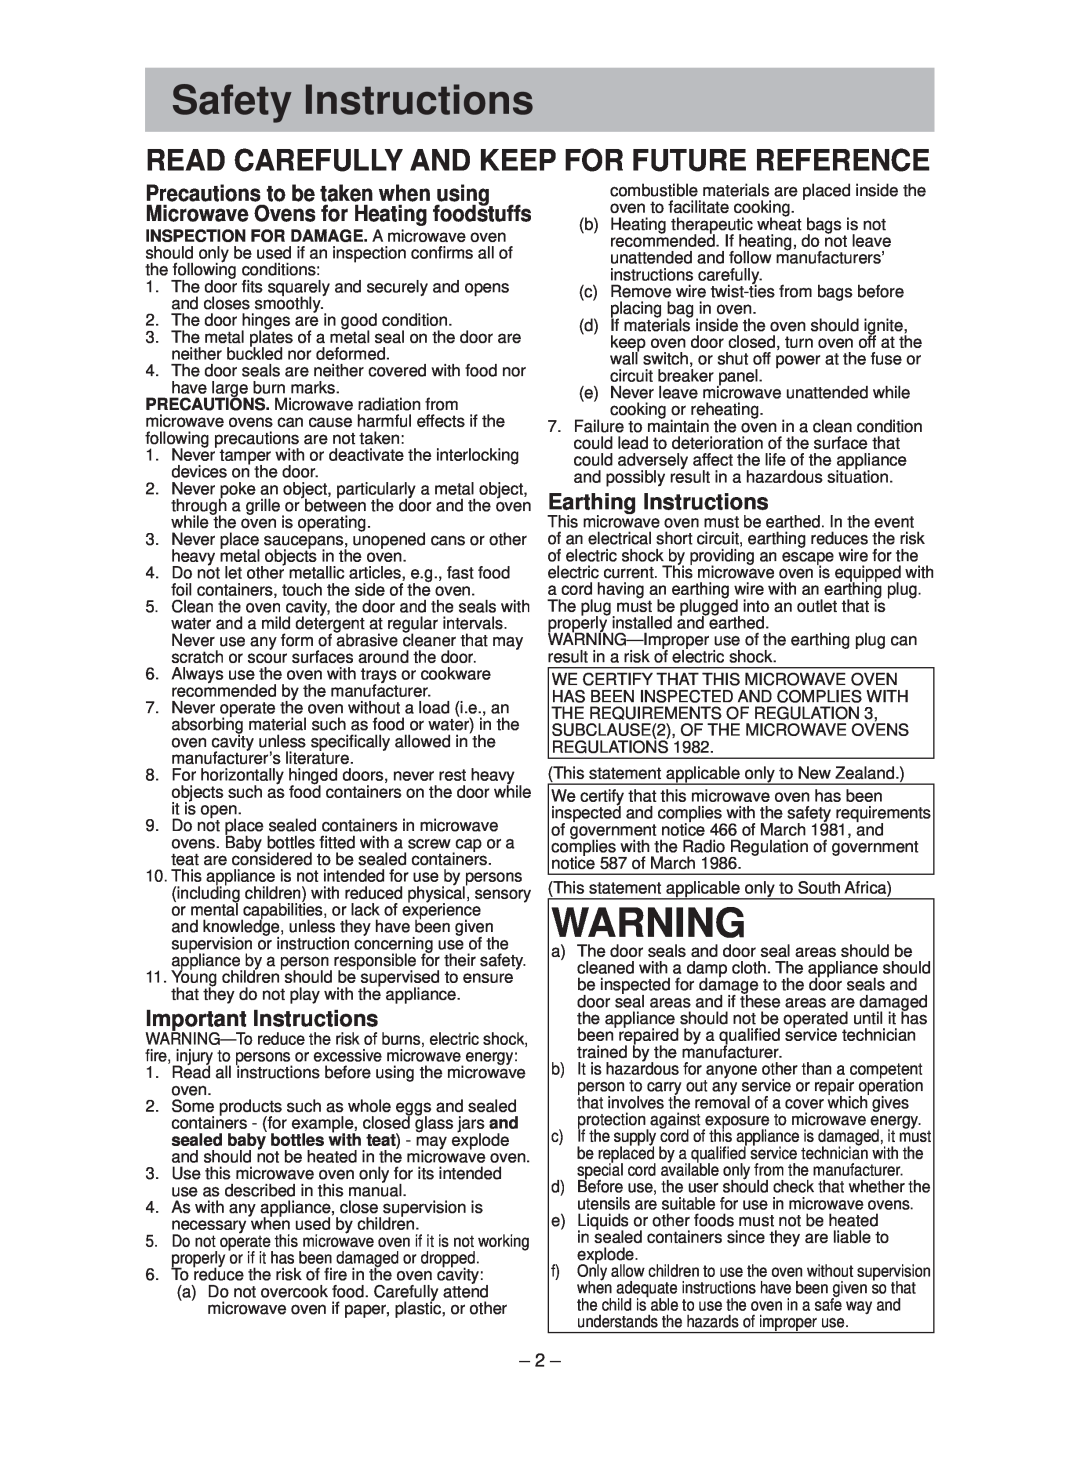 Panasonic NN-ST641W manual Safety Instructions, Read Carefully And Keep For Future Reference, Important Instructions 